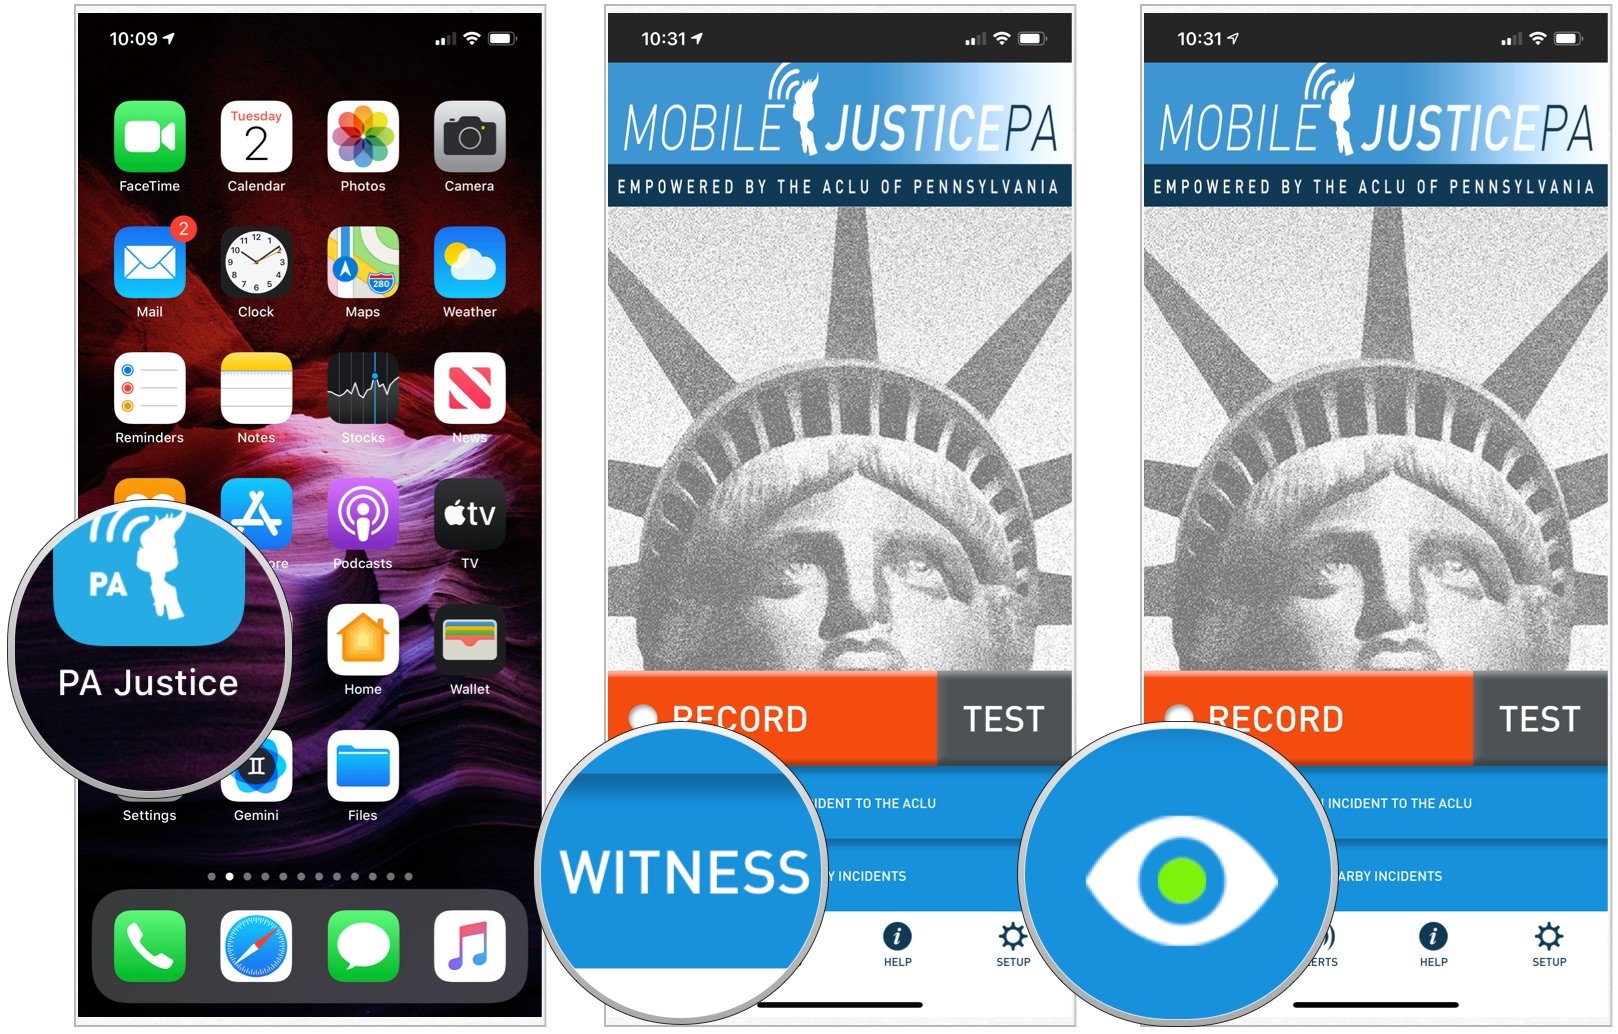 To turn the Witness feature on/off in the Mobile justice app, choose the Mobile Justice app from the Home screen on your device, tap Witness to turn the tool on. Tap Witness again, to turn it off. Notice the eye icon next to the word Witness turns green and red, depending on your setting. 